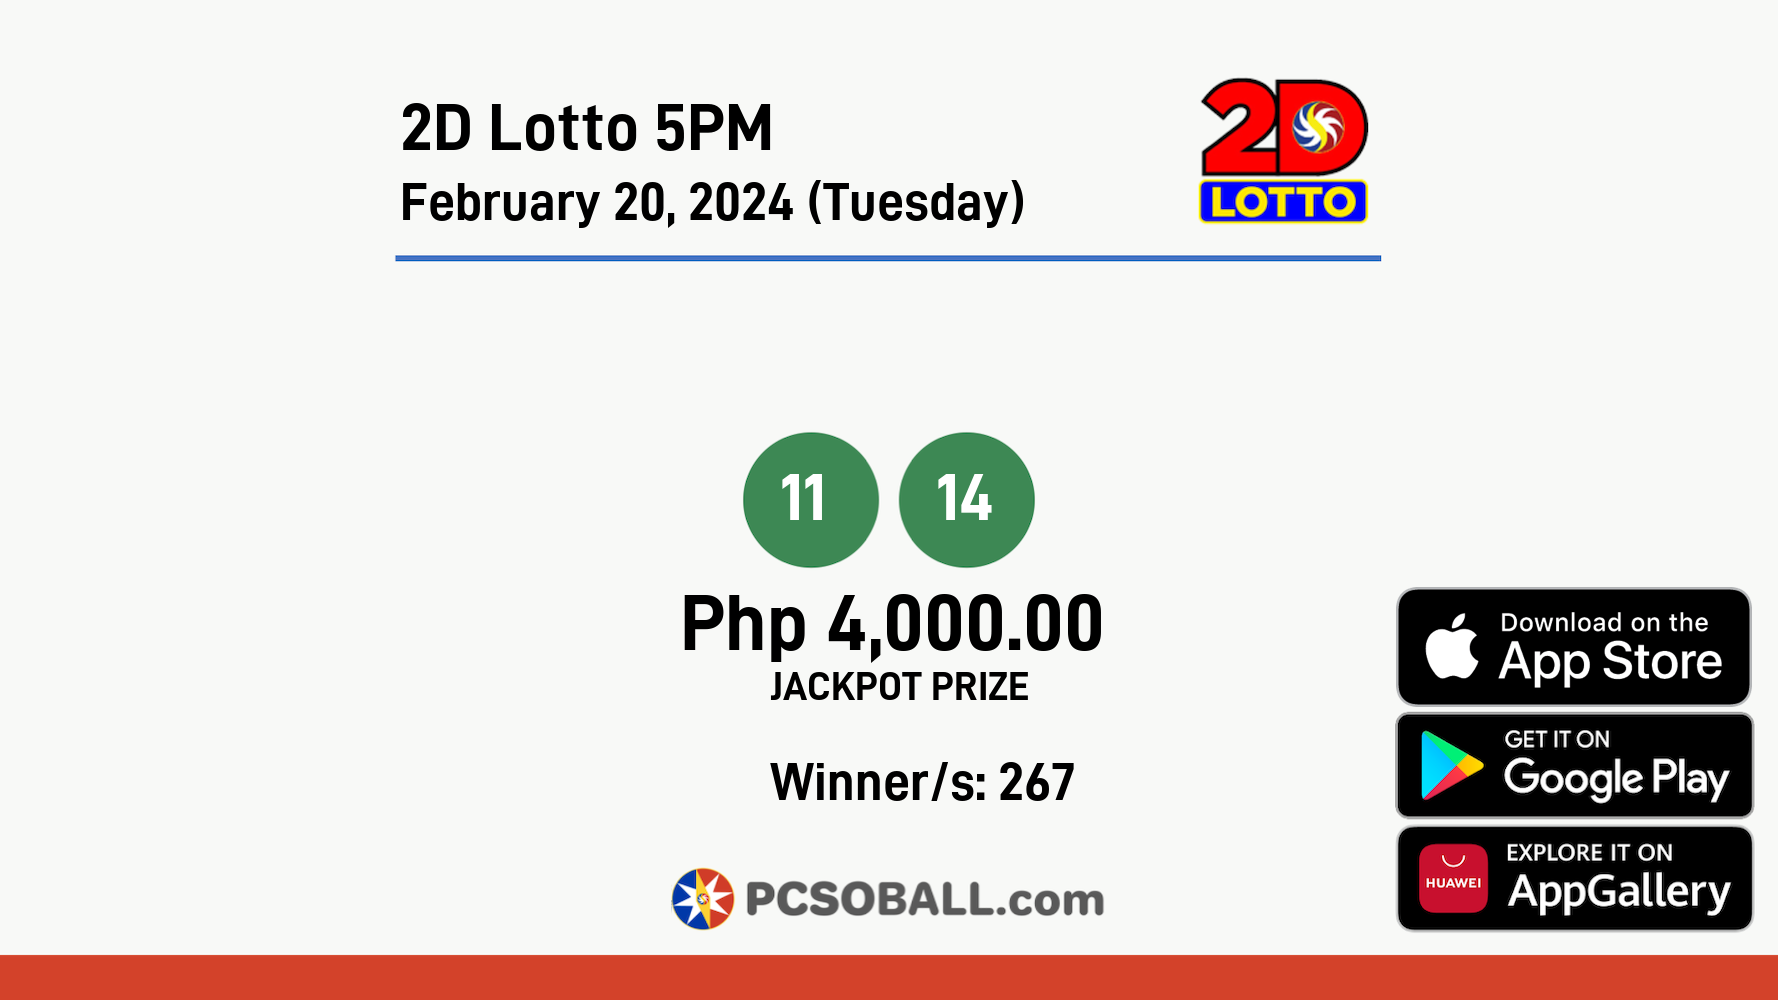 2D Lotto 5PM February 20, 2024 (Tuesday) Result